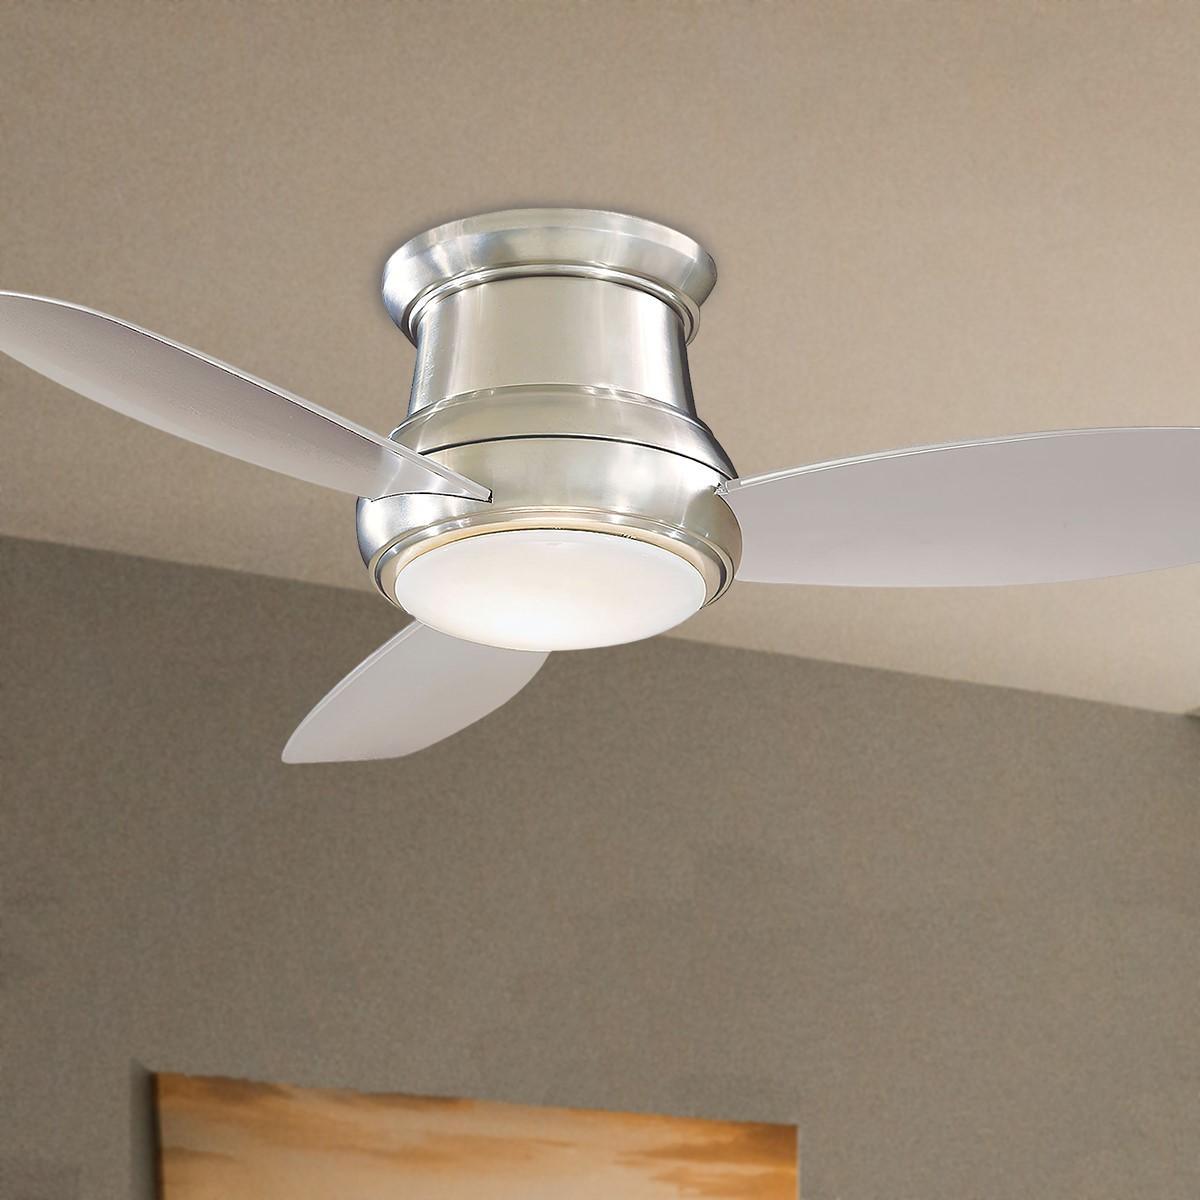 Concept II 44 Inch Modern Ceiling Fan With Light And Remote - Bees Lighting